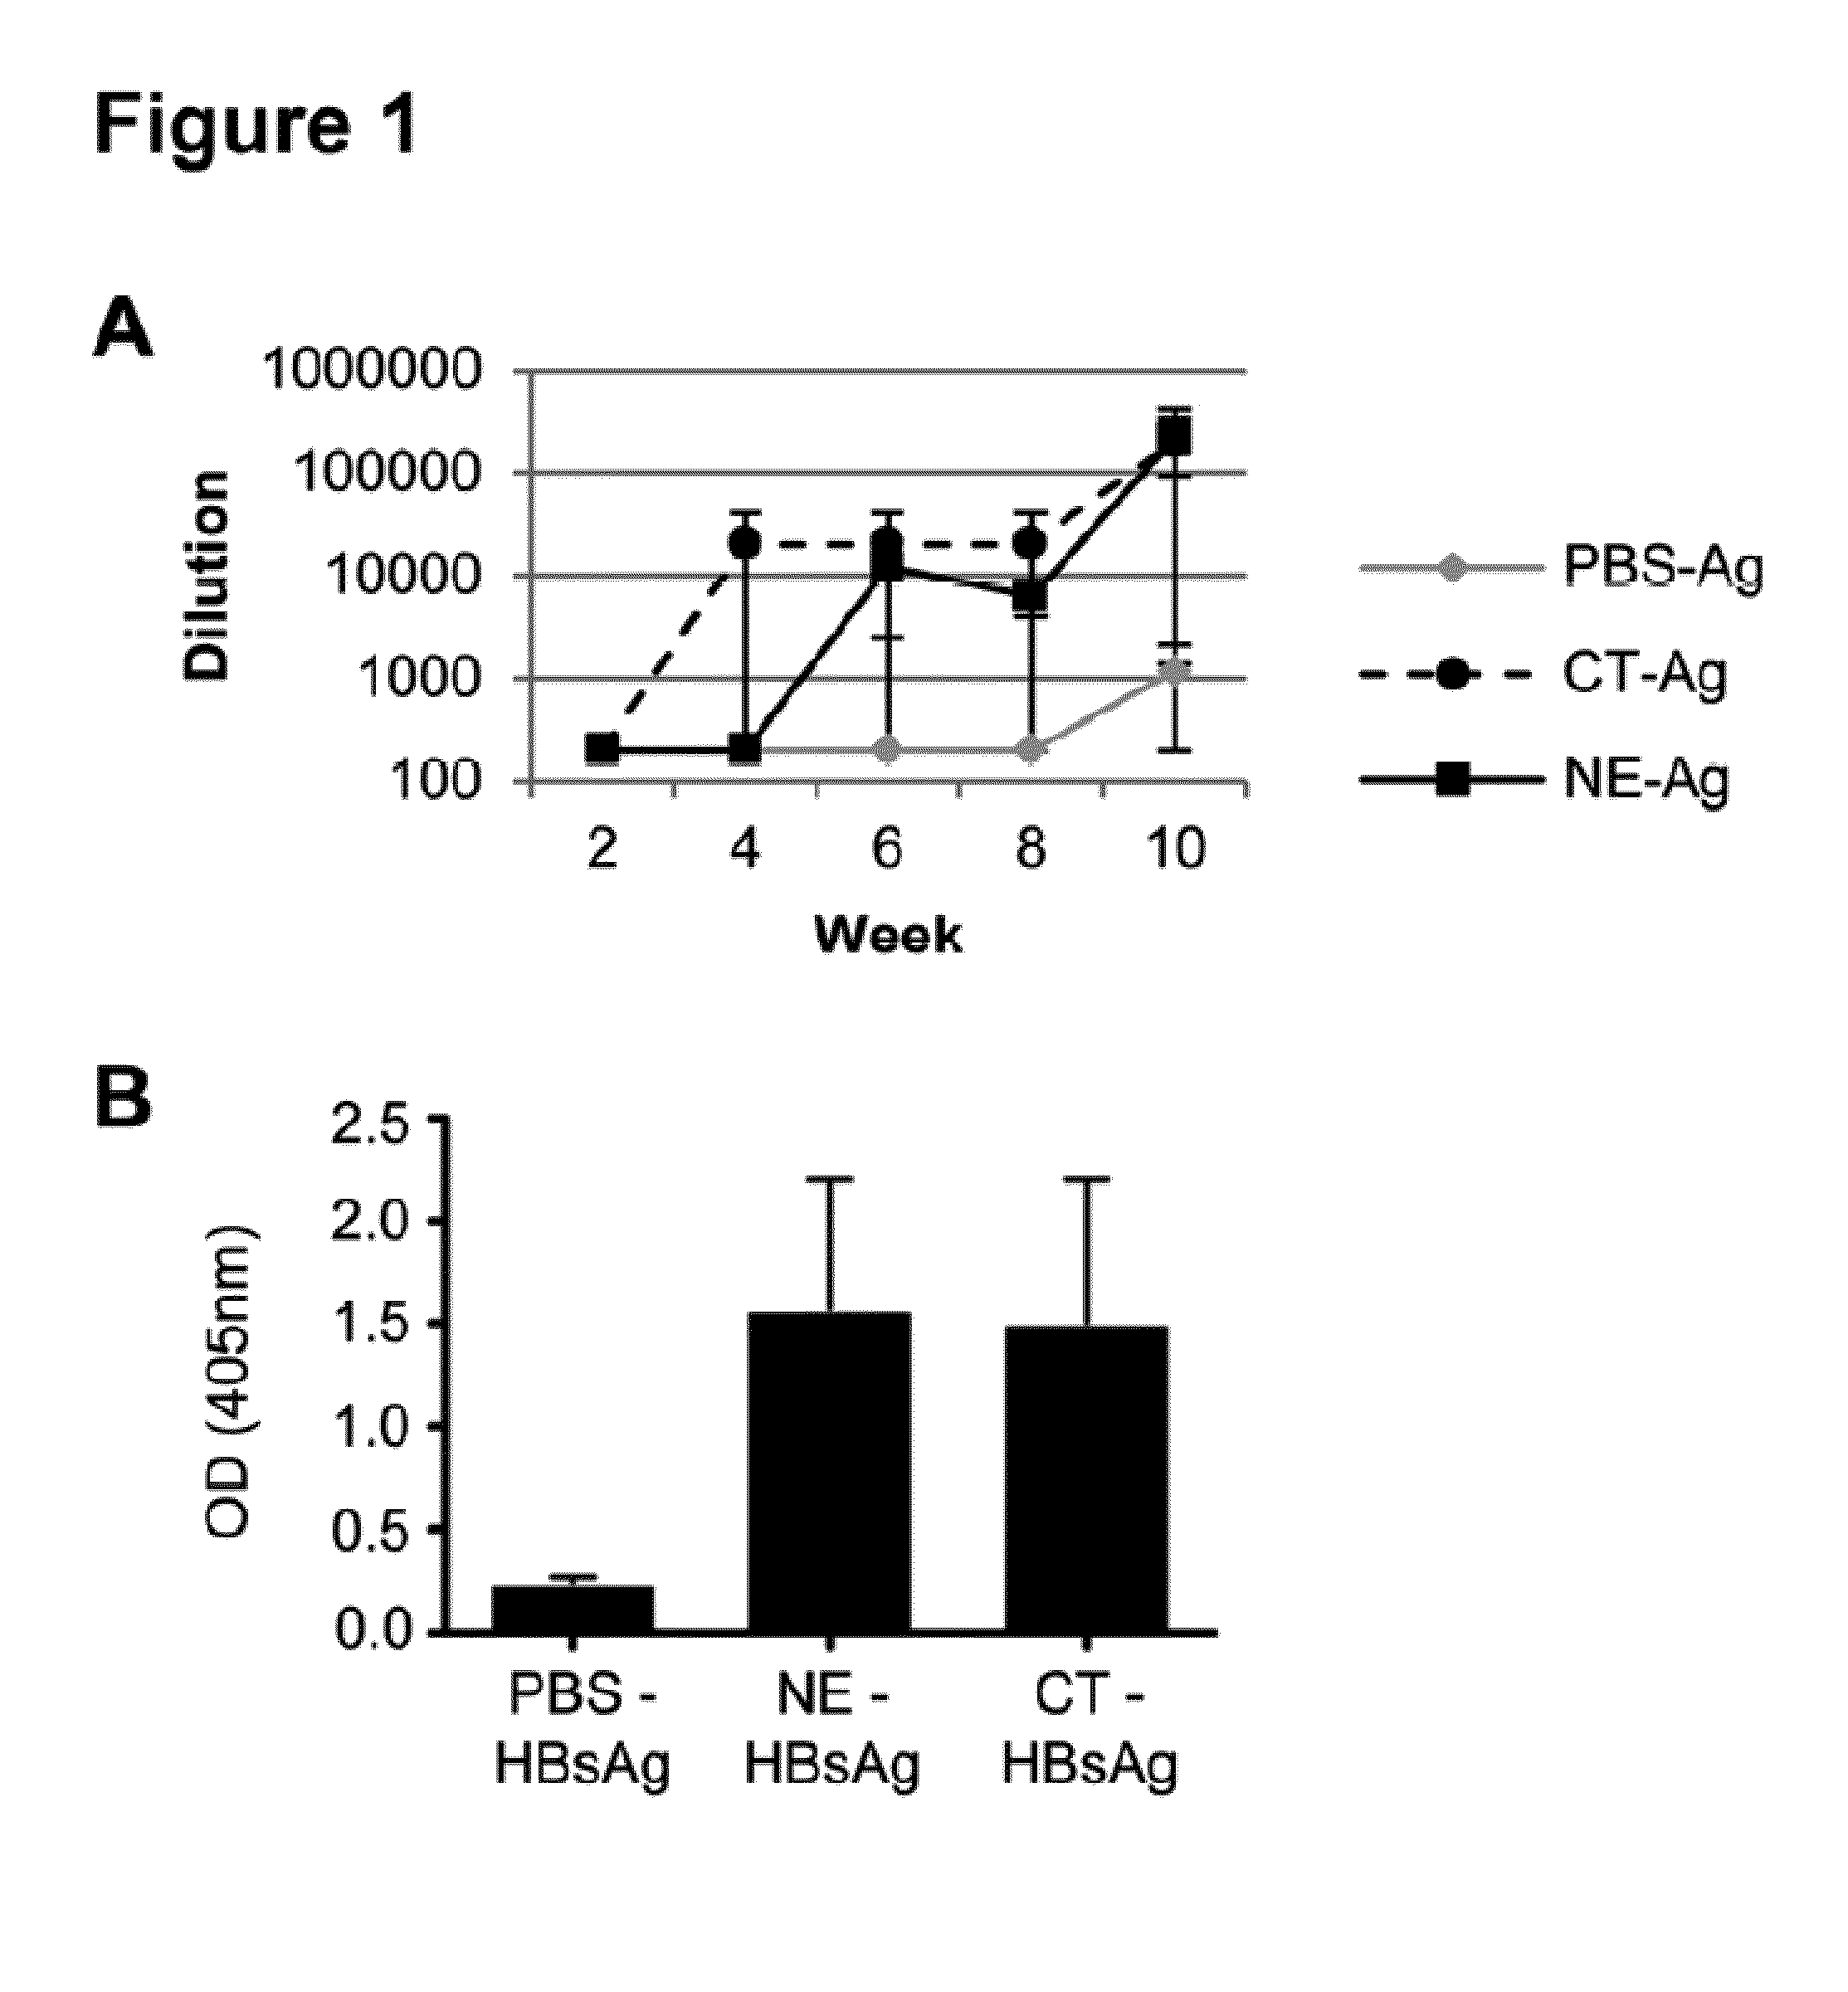 Immunogenic apoptosis inducing compositions and methods of use thereof